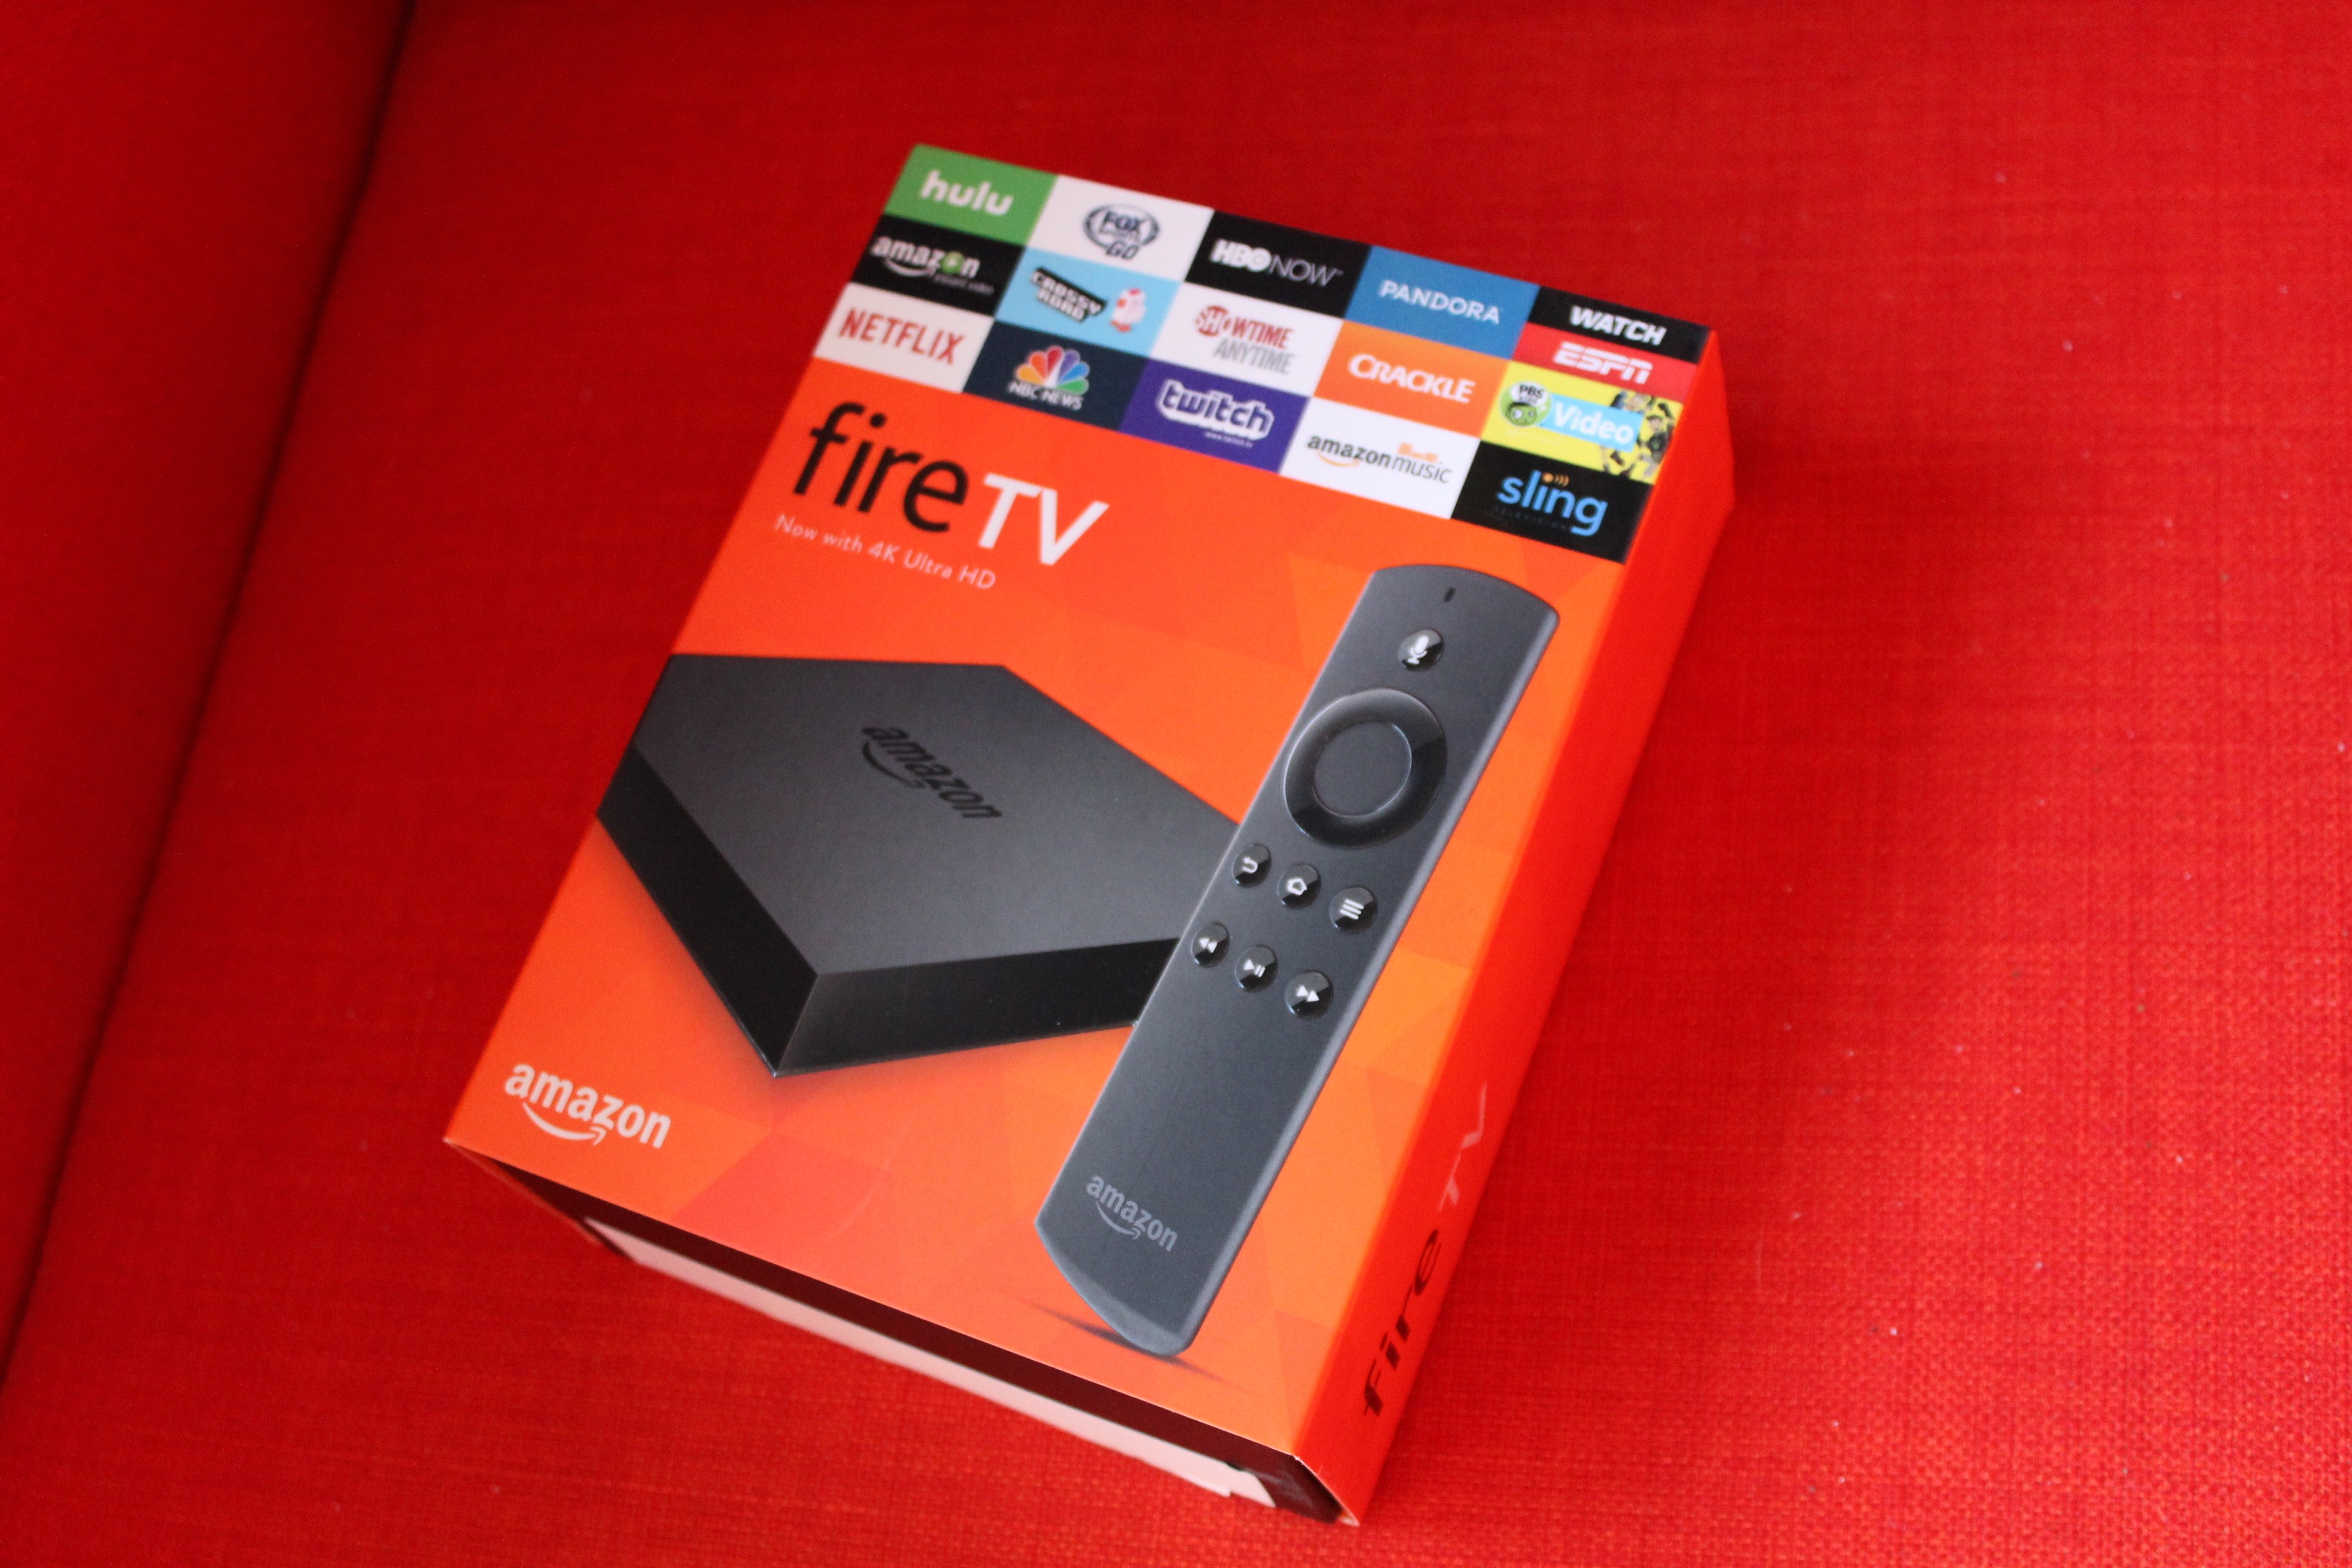 Amazons 2015 Fire TV Finally, Amazon gets the streaming box right Ars Technica